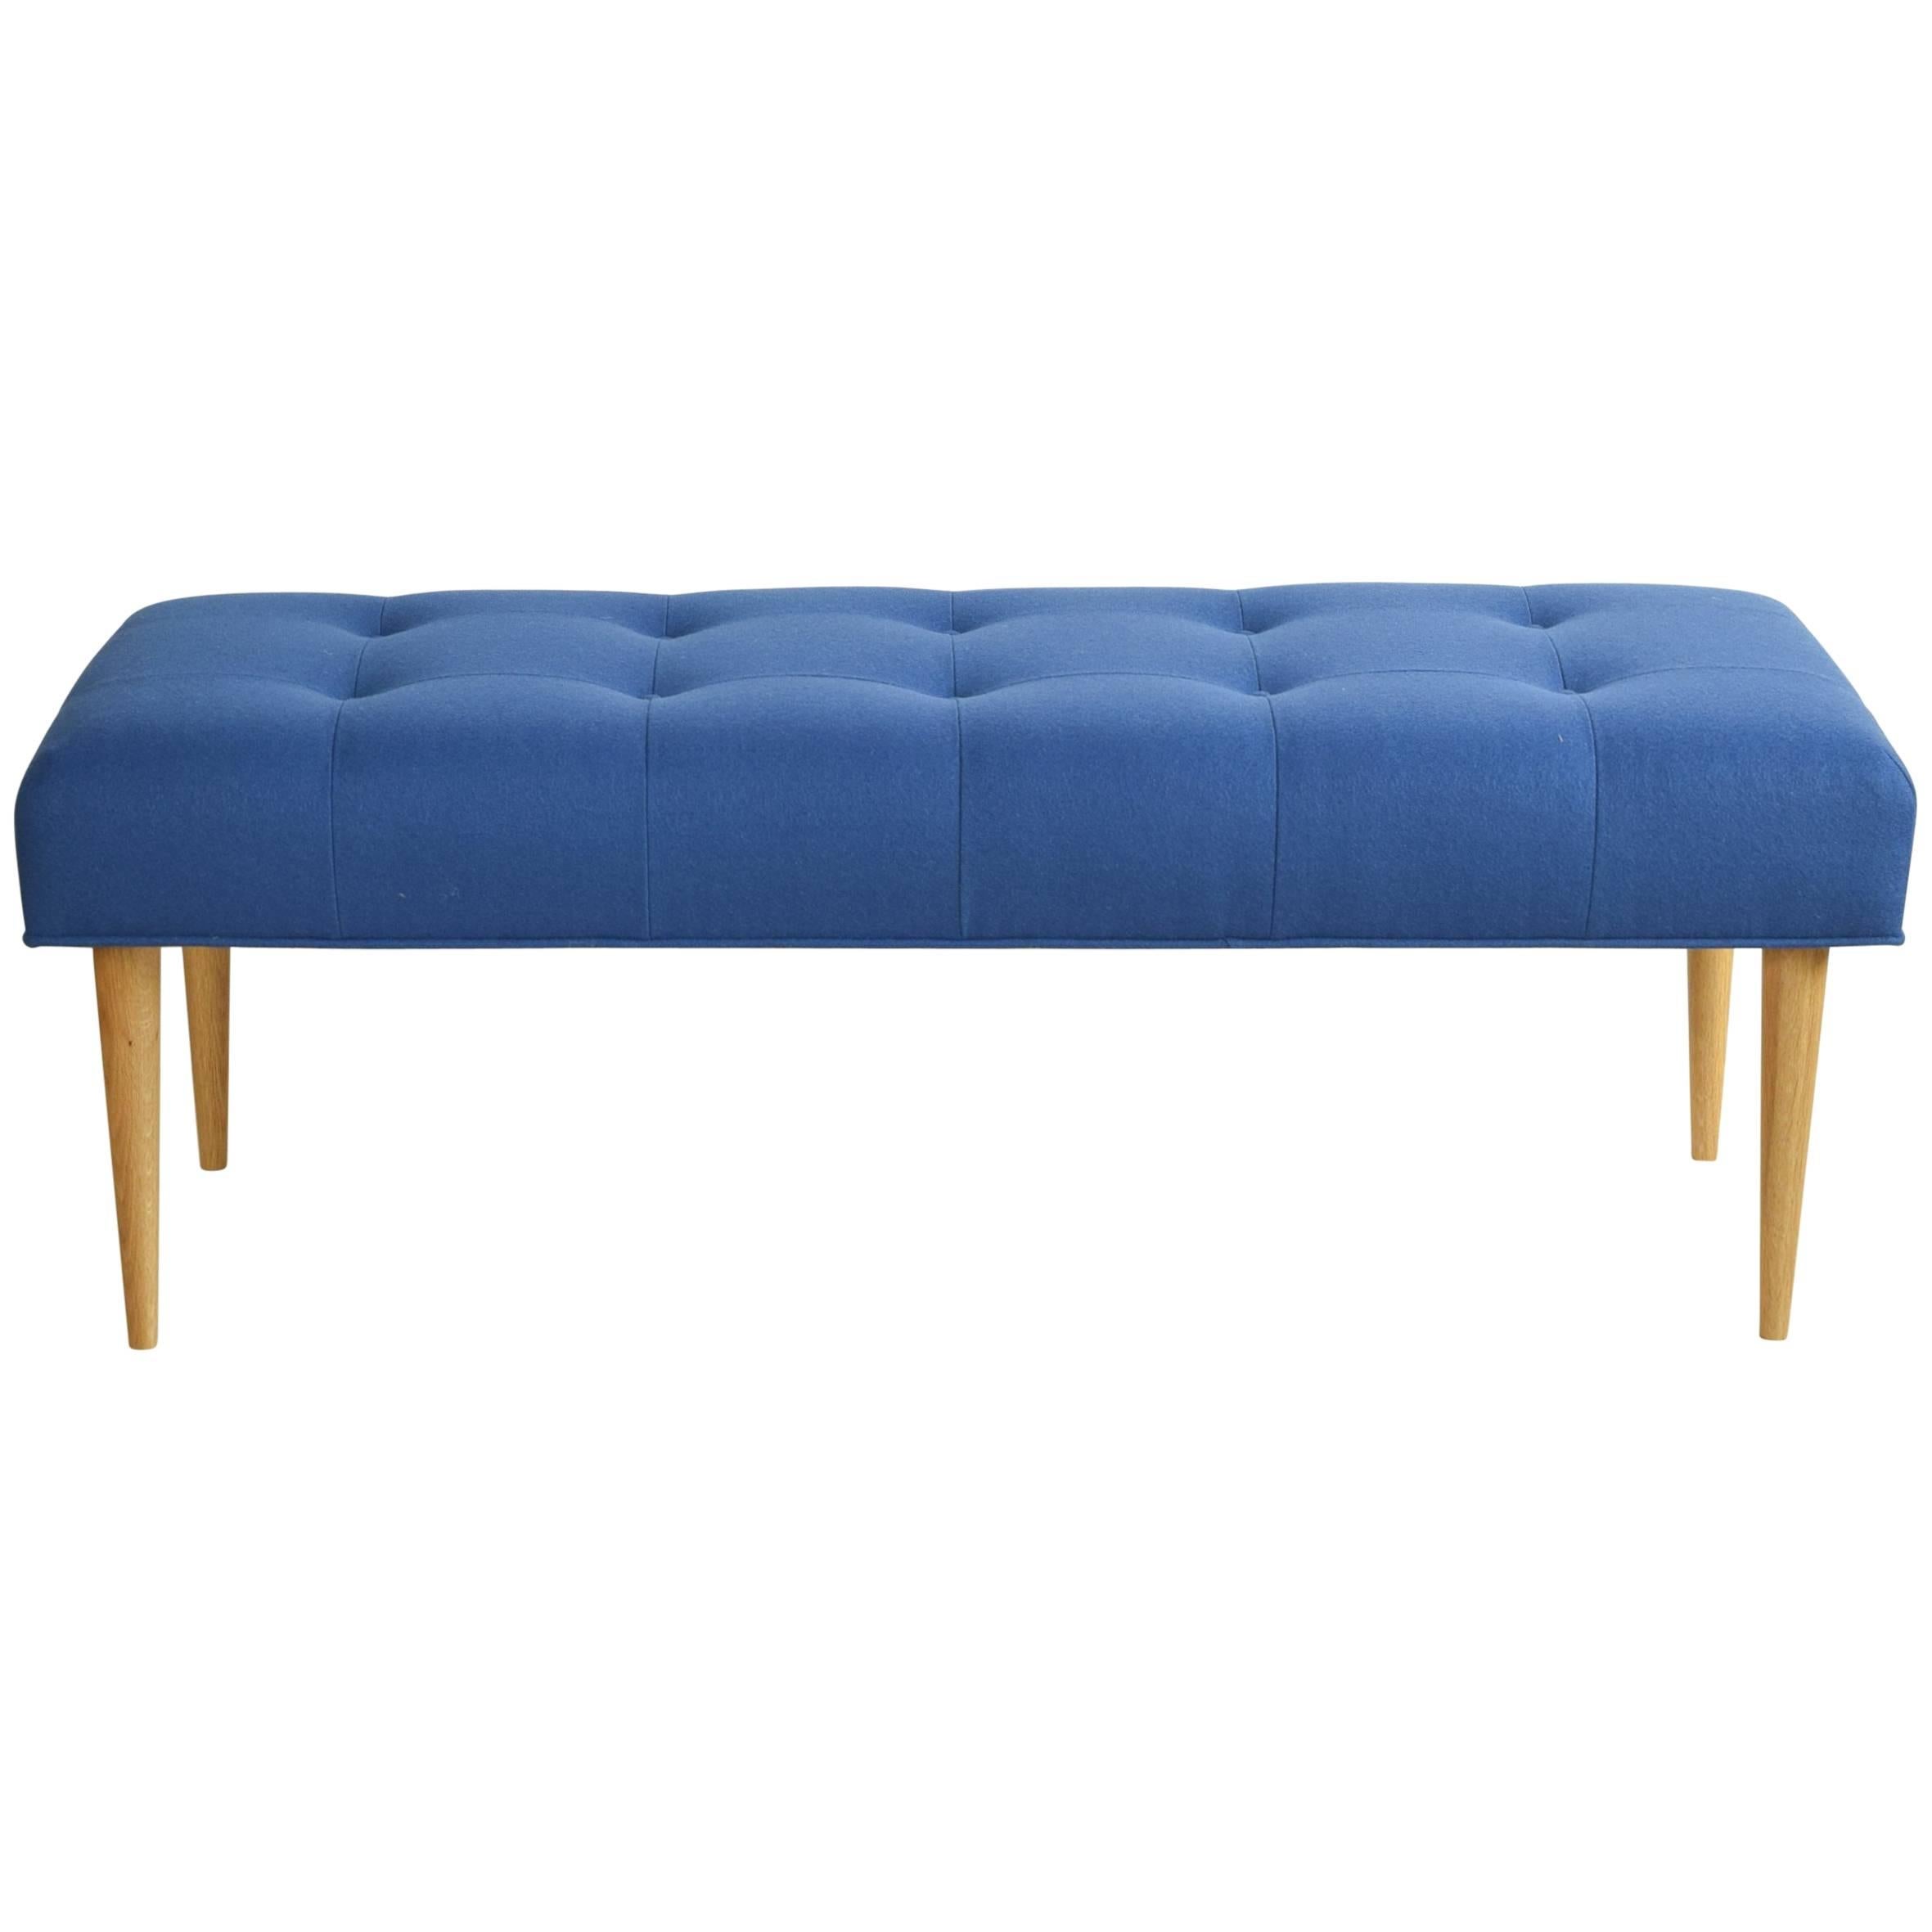 Modern Button Tufted Bench Upholstered in Baltic Blue with Oak Spindle Legs For Sale